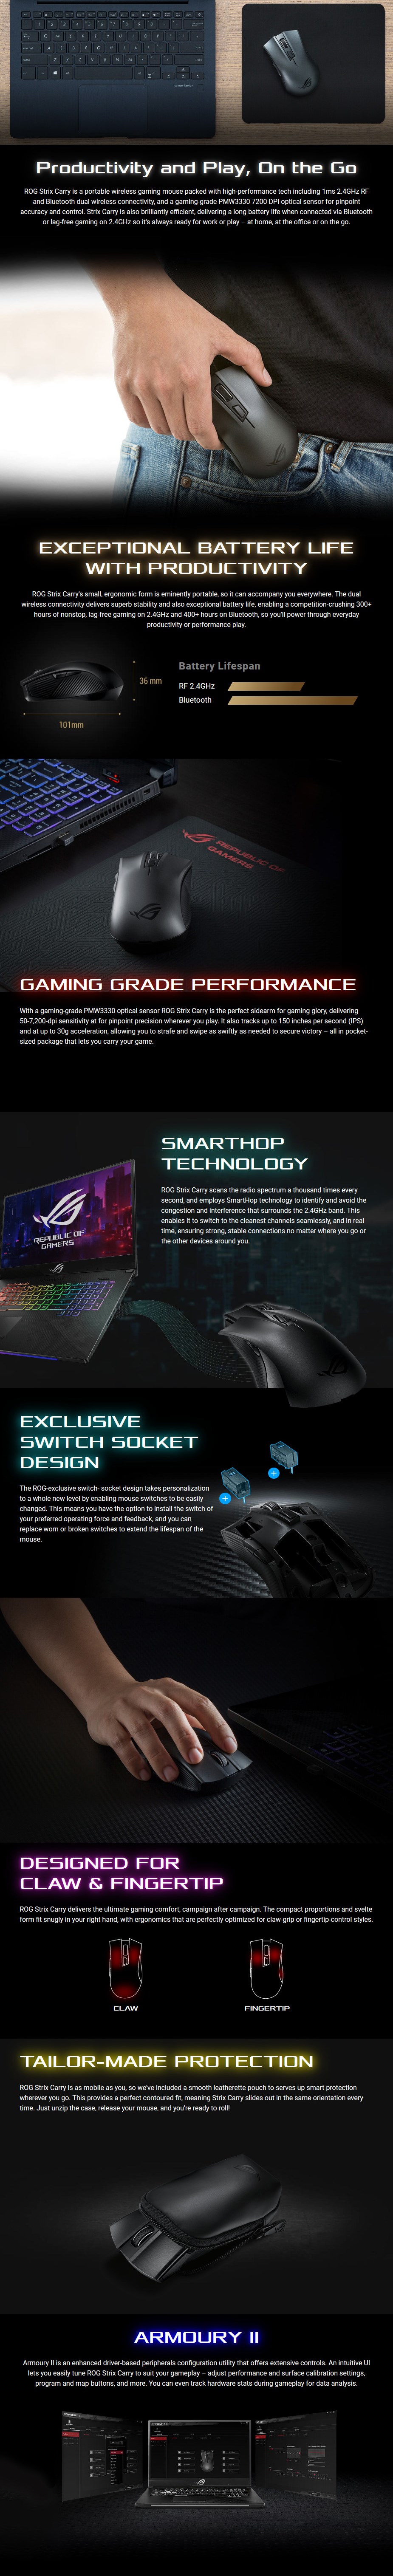 Asus Rog Strix Carry Wireless Optical Gaming Mouse Computer Alliance